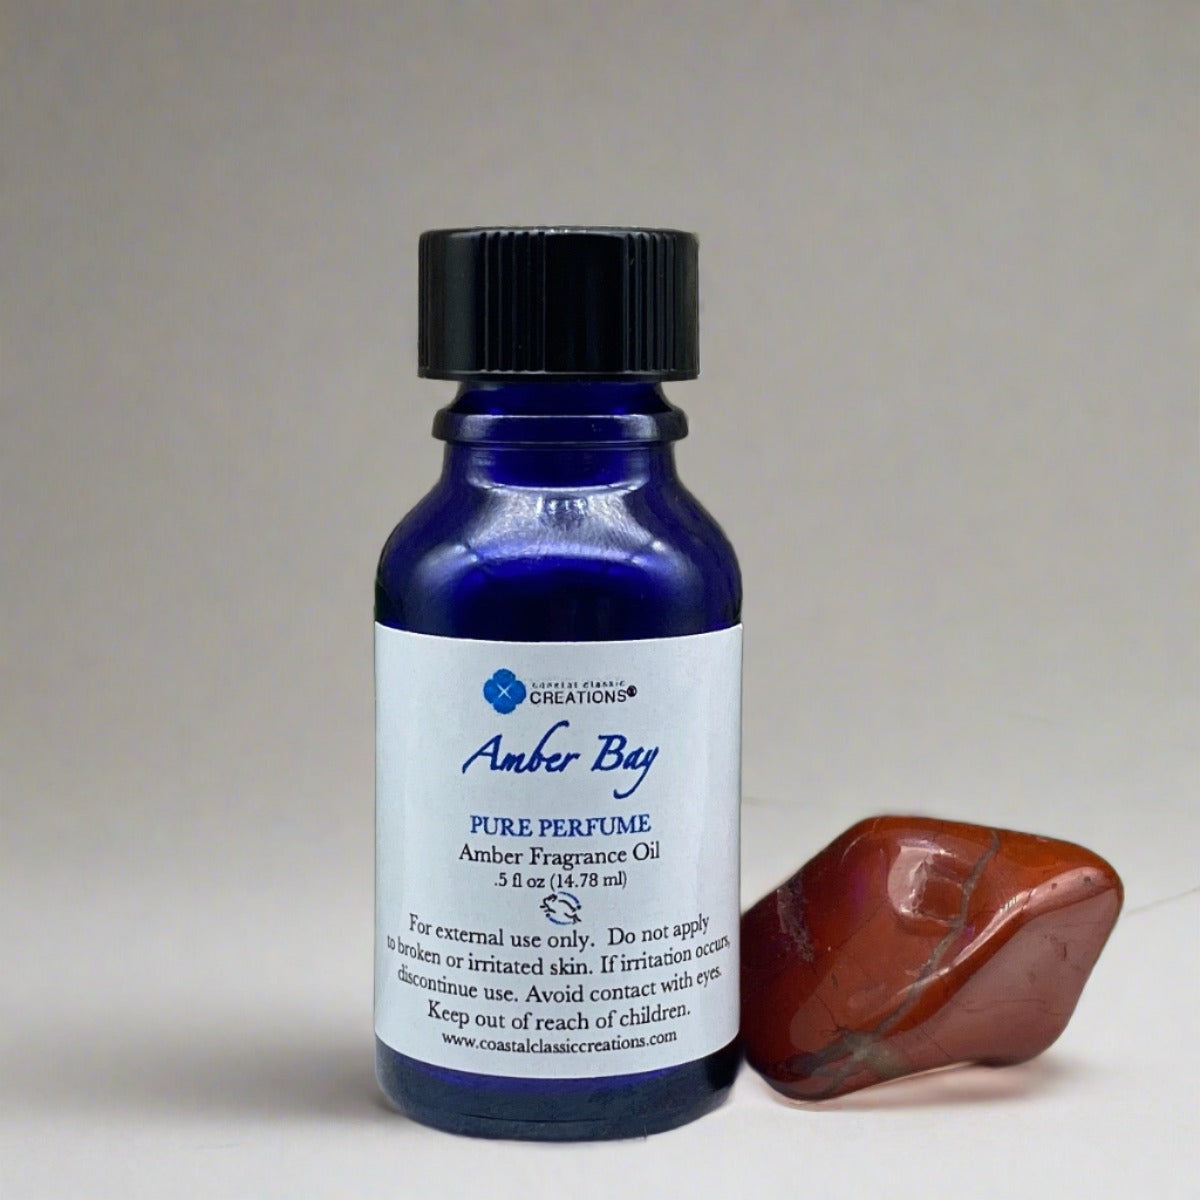 Half-ounce blue bottle of Amber Bay Amber Perfume with a black cap, labeled with the product name and ingredients, featuring a sleek, cylindrical shape